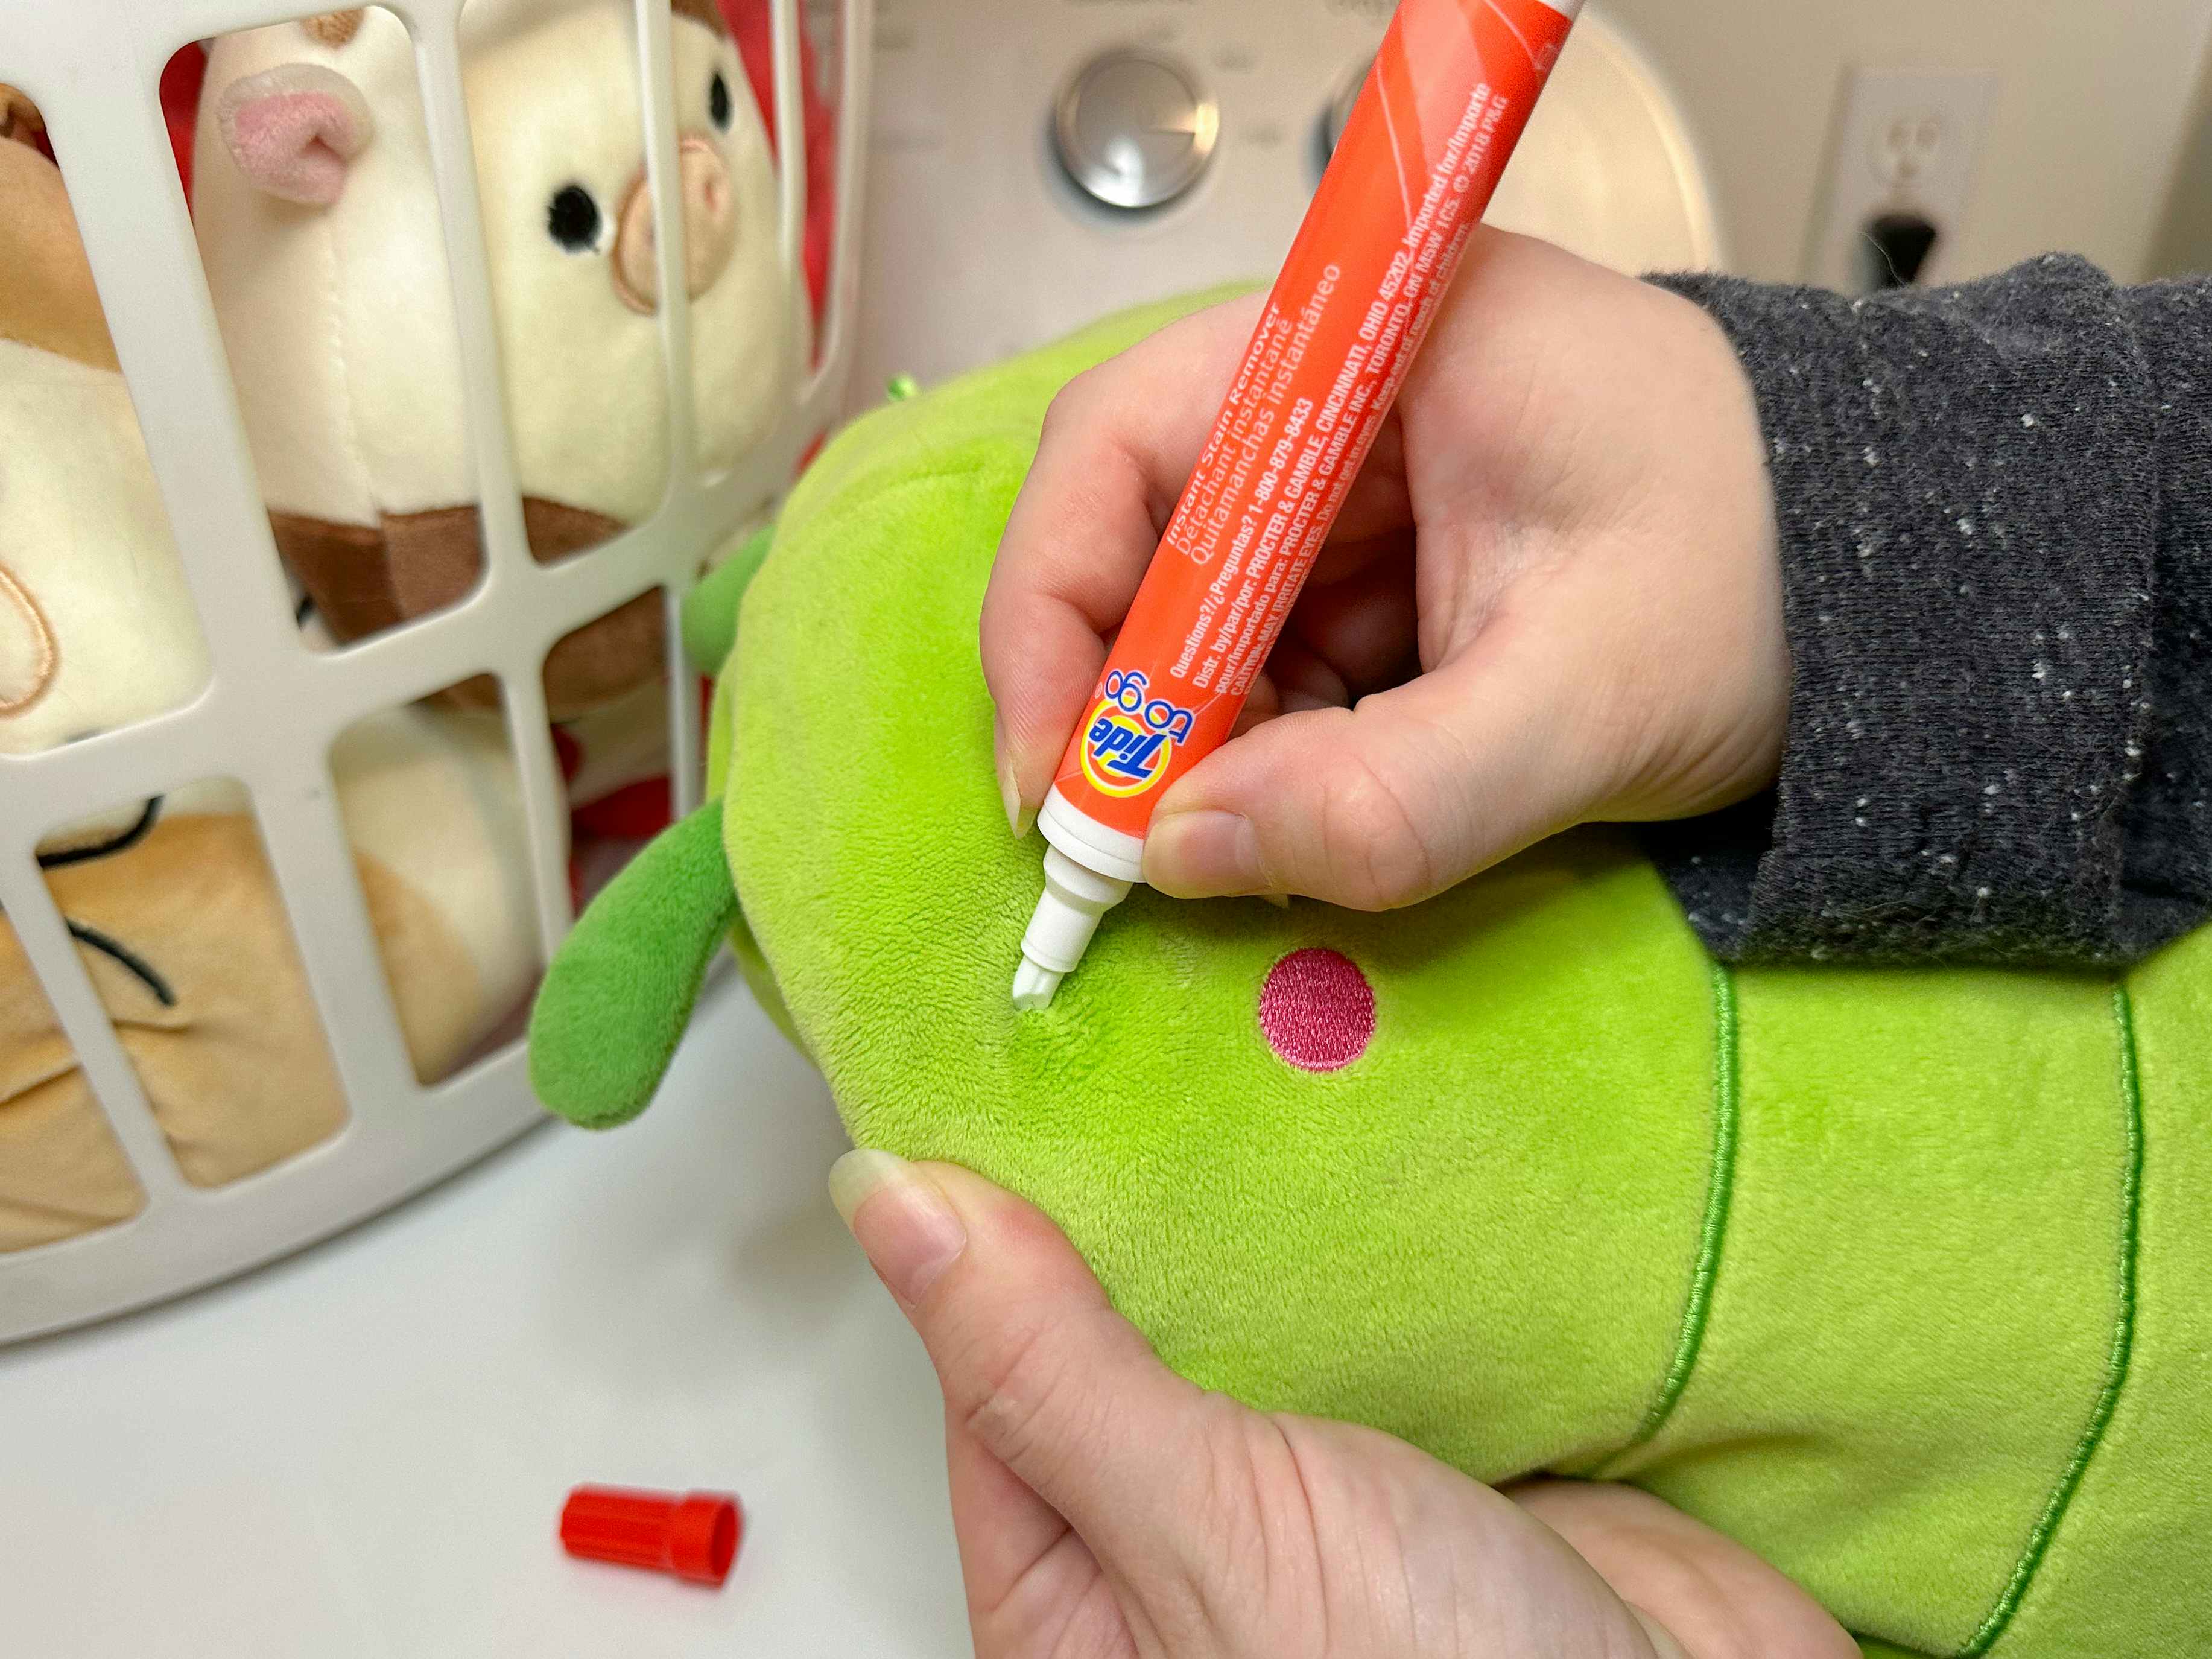 Someone using a Tide pen on a Squishmallow next to a laundry basket full of Squishmallows